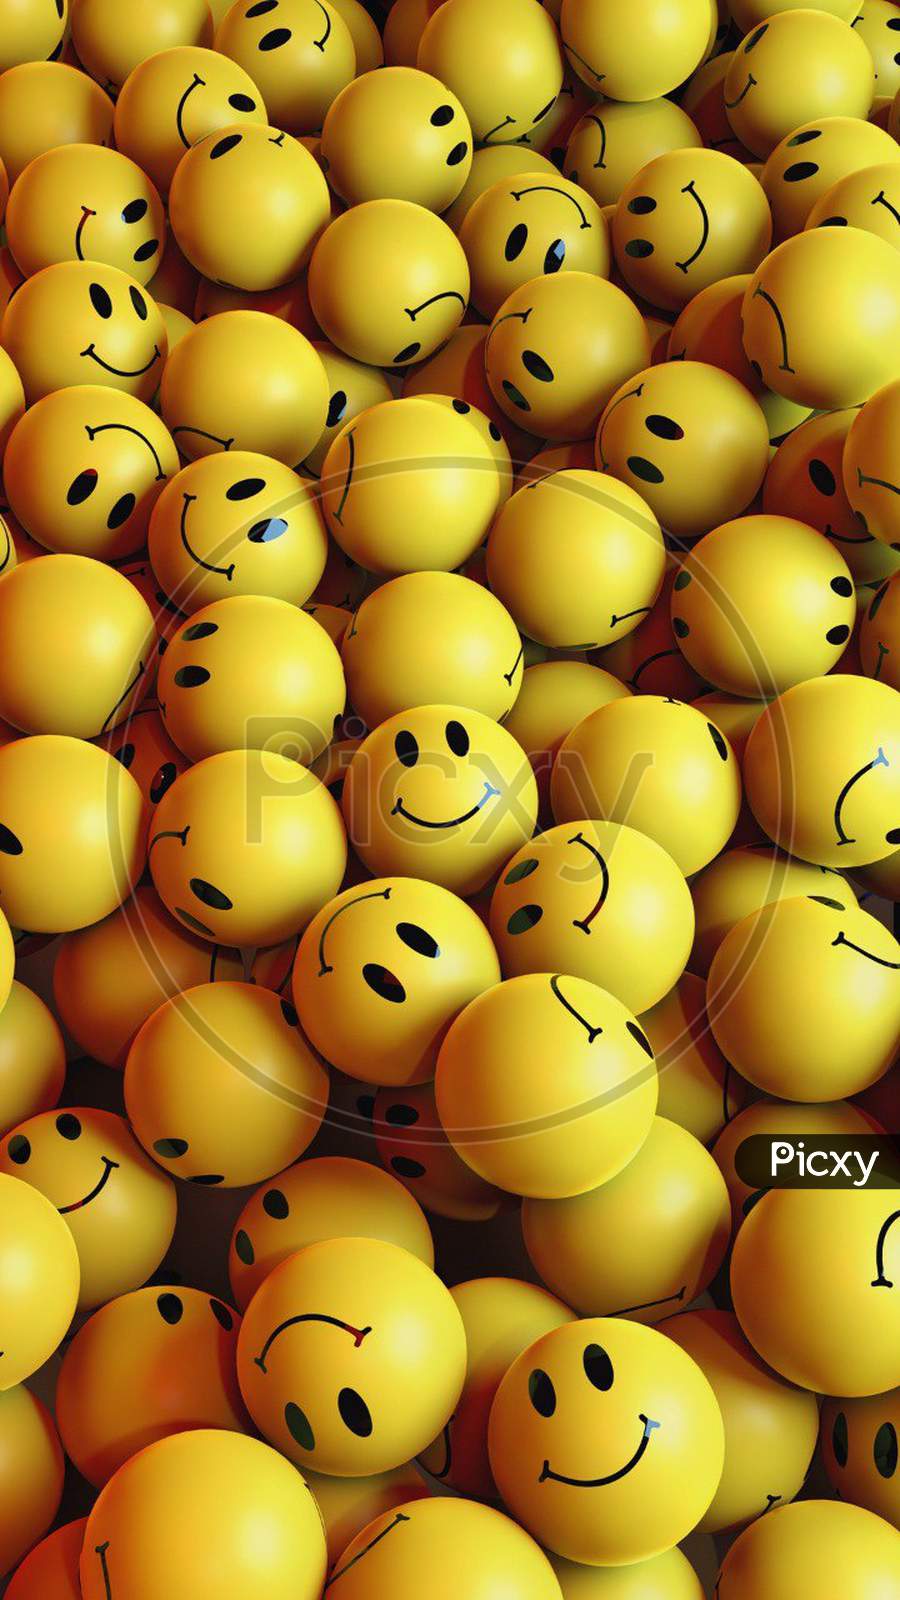 Collection / Group of Yellow colored smiley balls